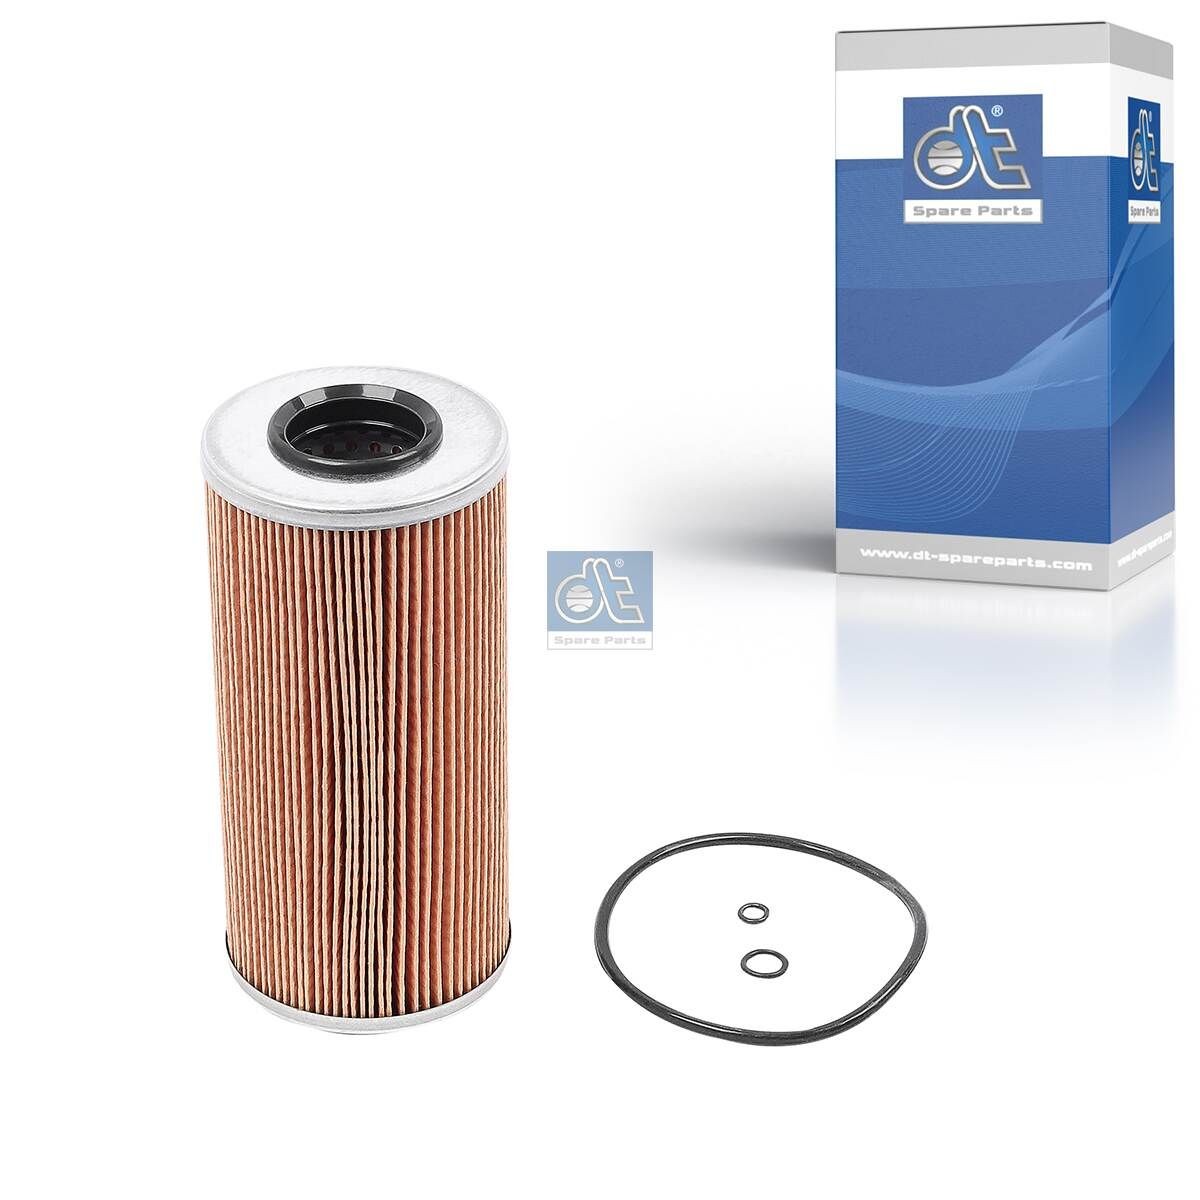 HU 951 x DT Spare Parts 3.14108 Oil filter A606 180 01 09